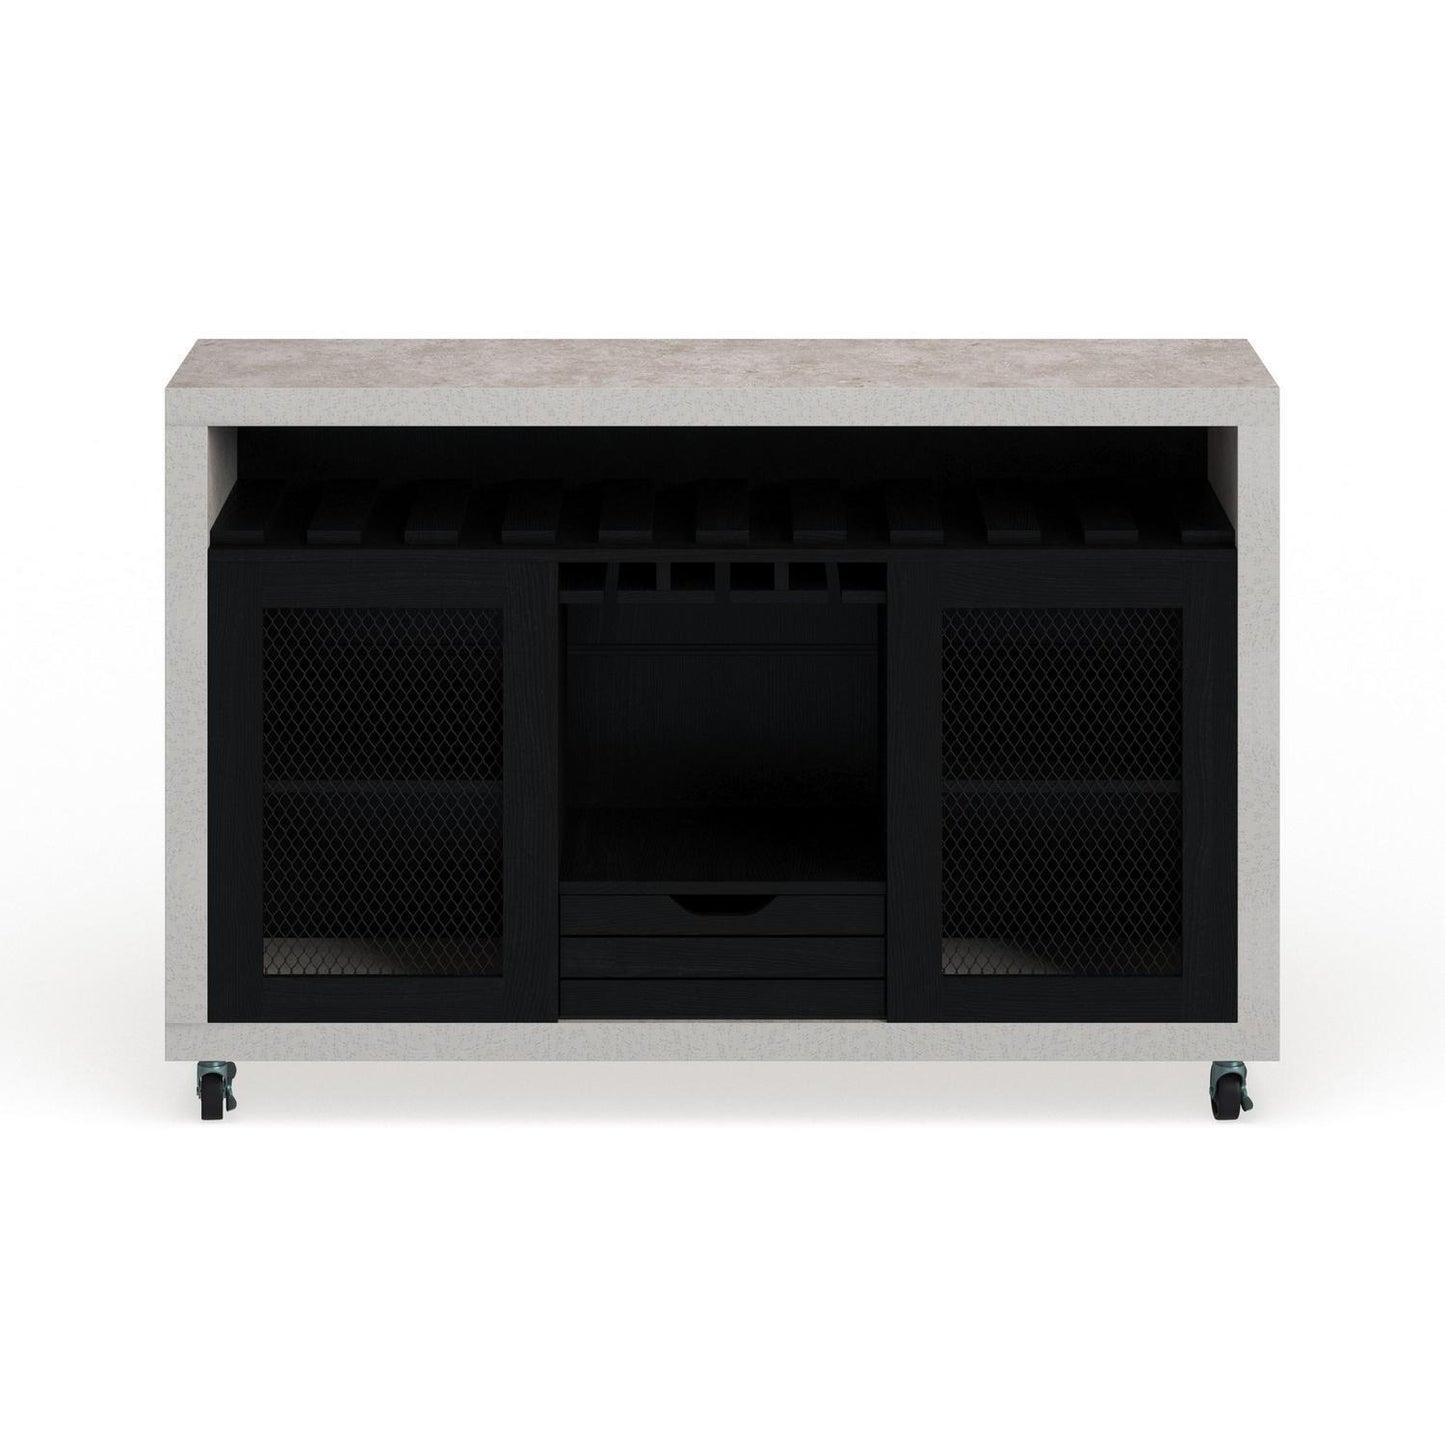 Rolling Sideboard Buffet Serving Cart Storage Cabinet in Black and Cement Finish